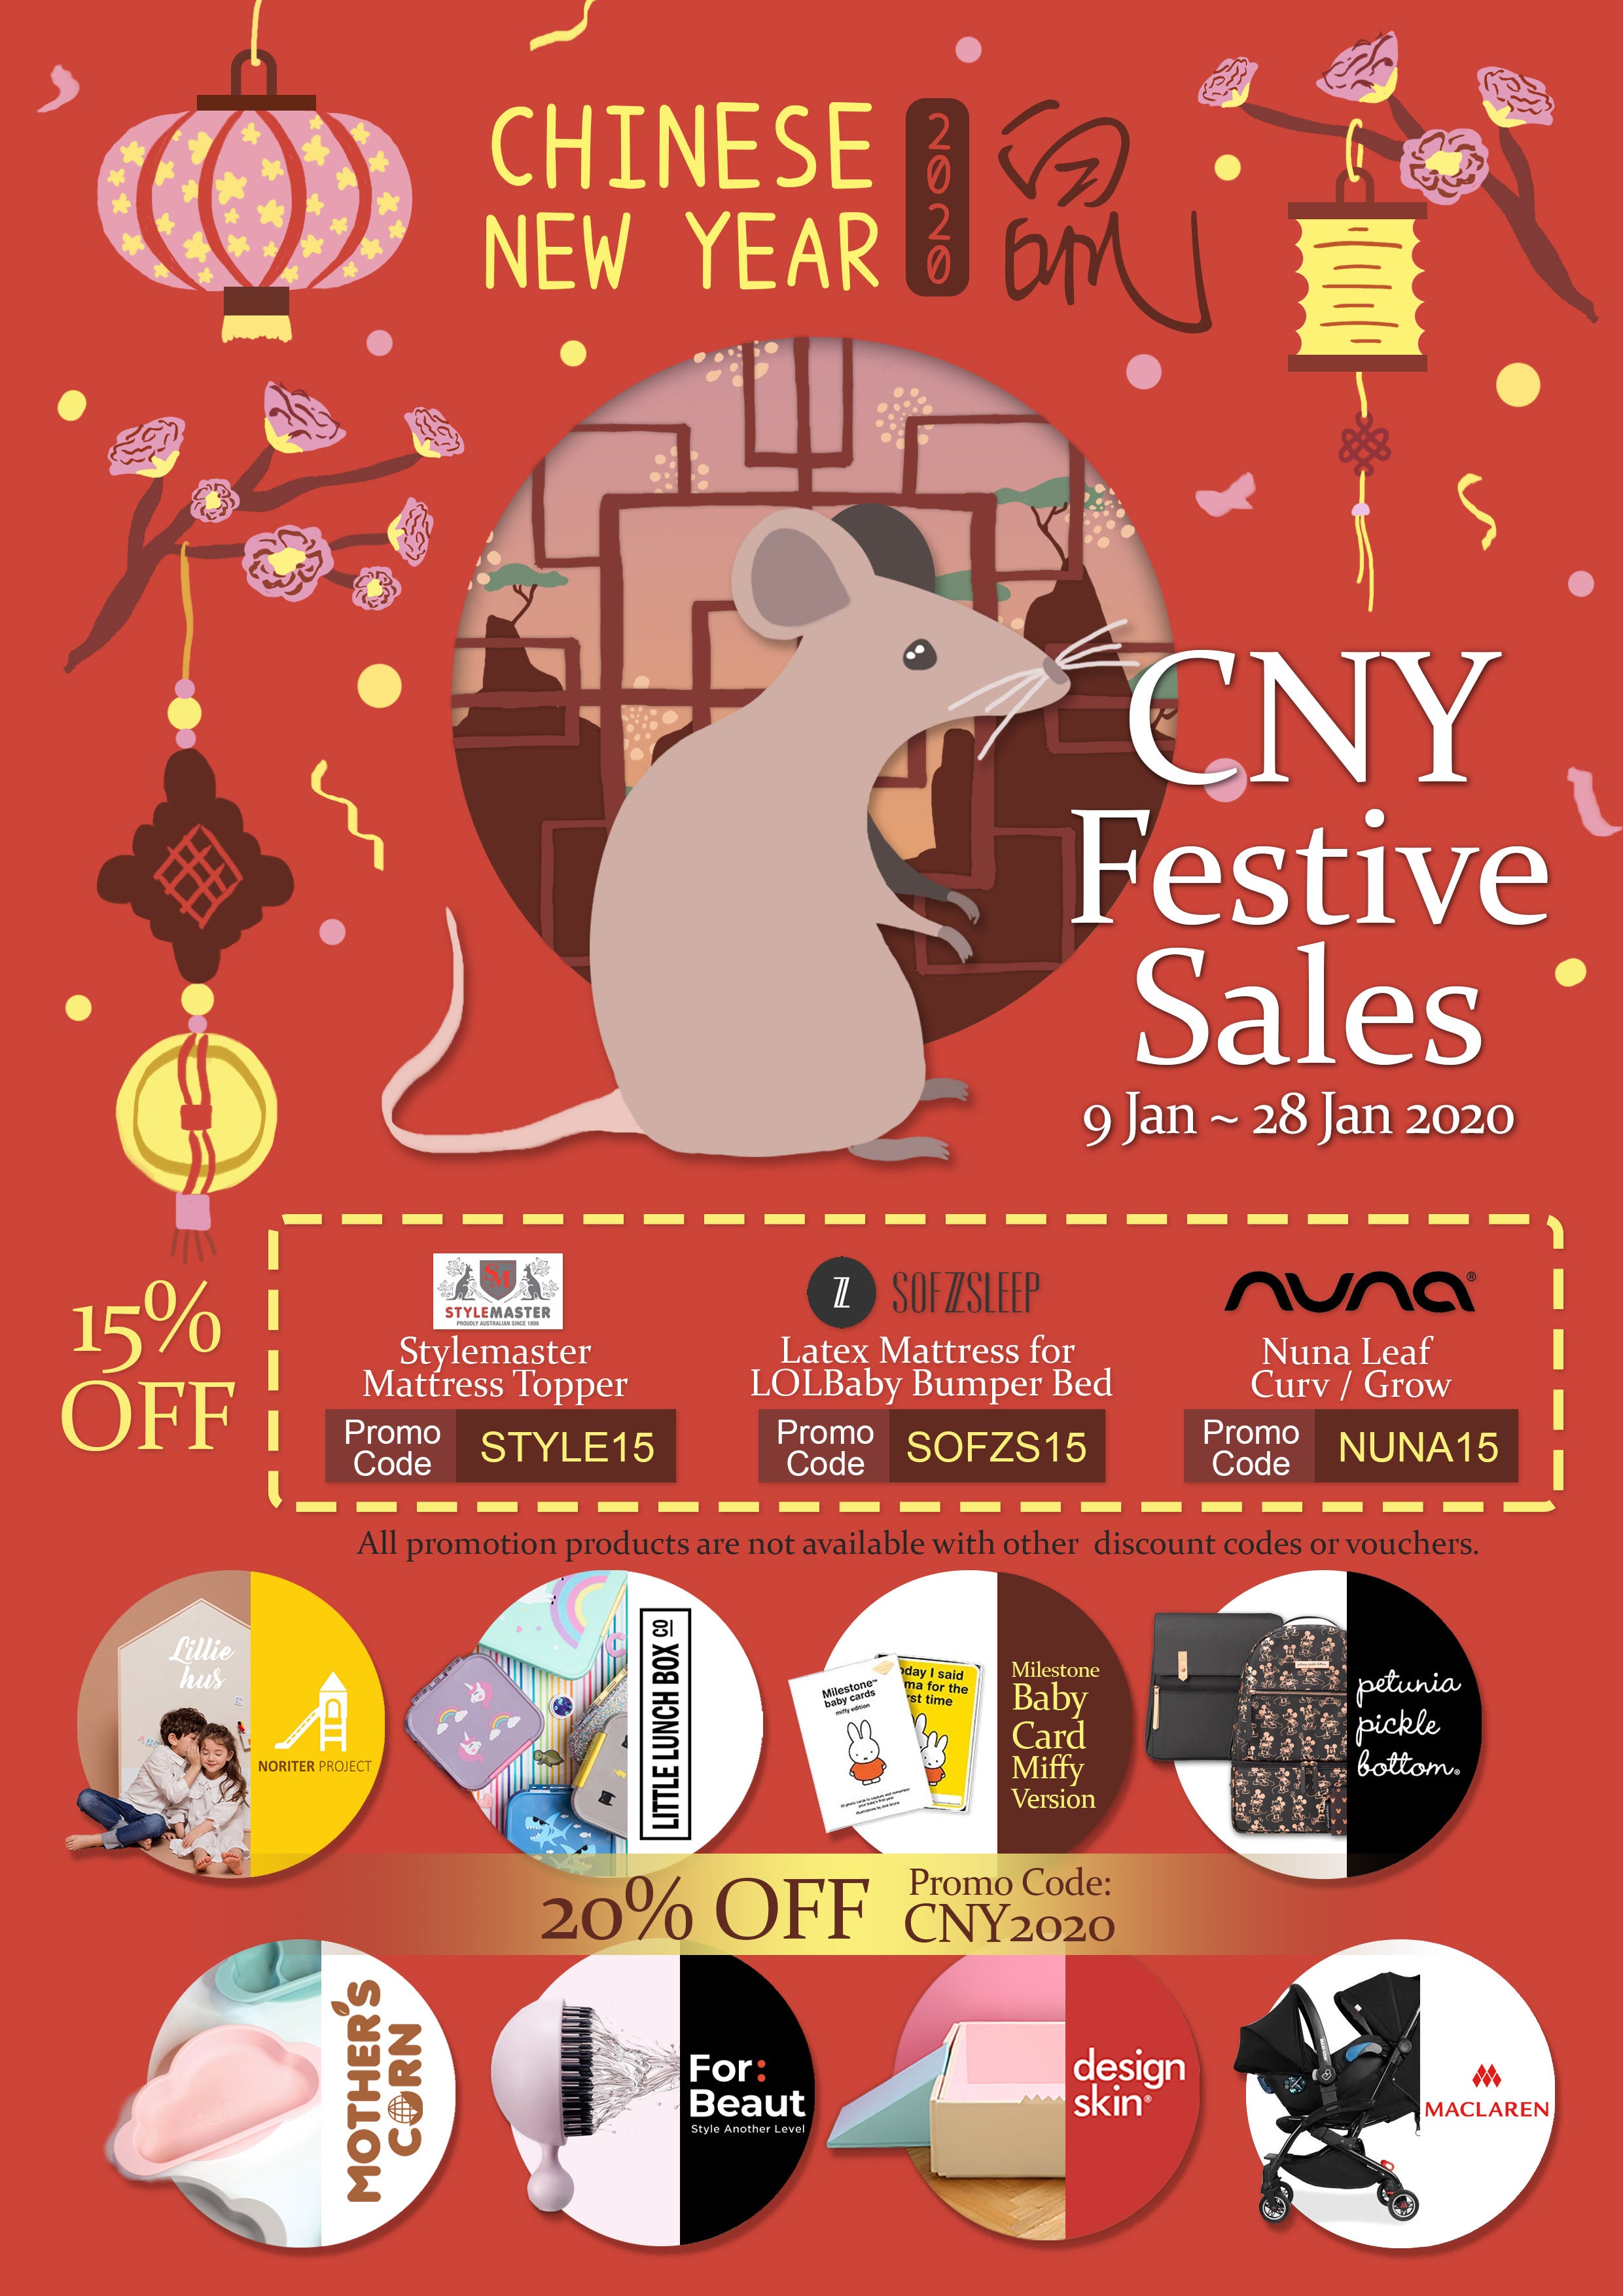 Little Baby Chinese New Year Sales